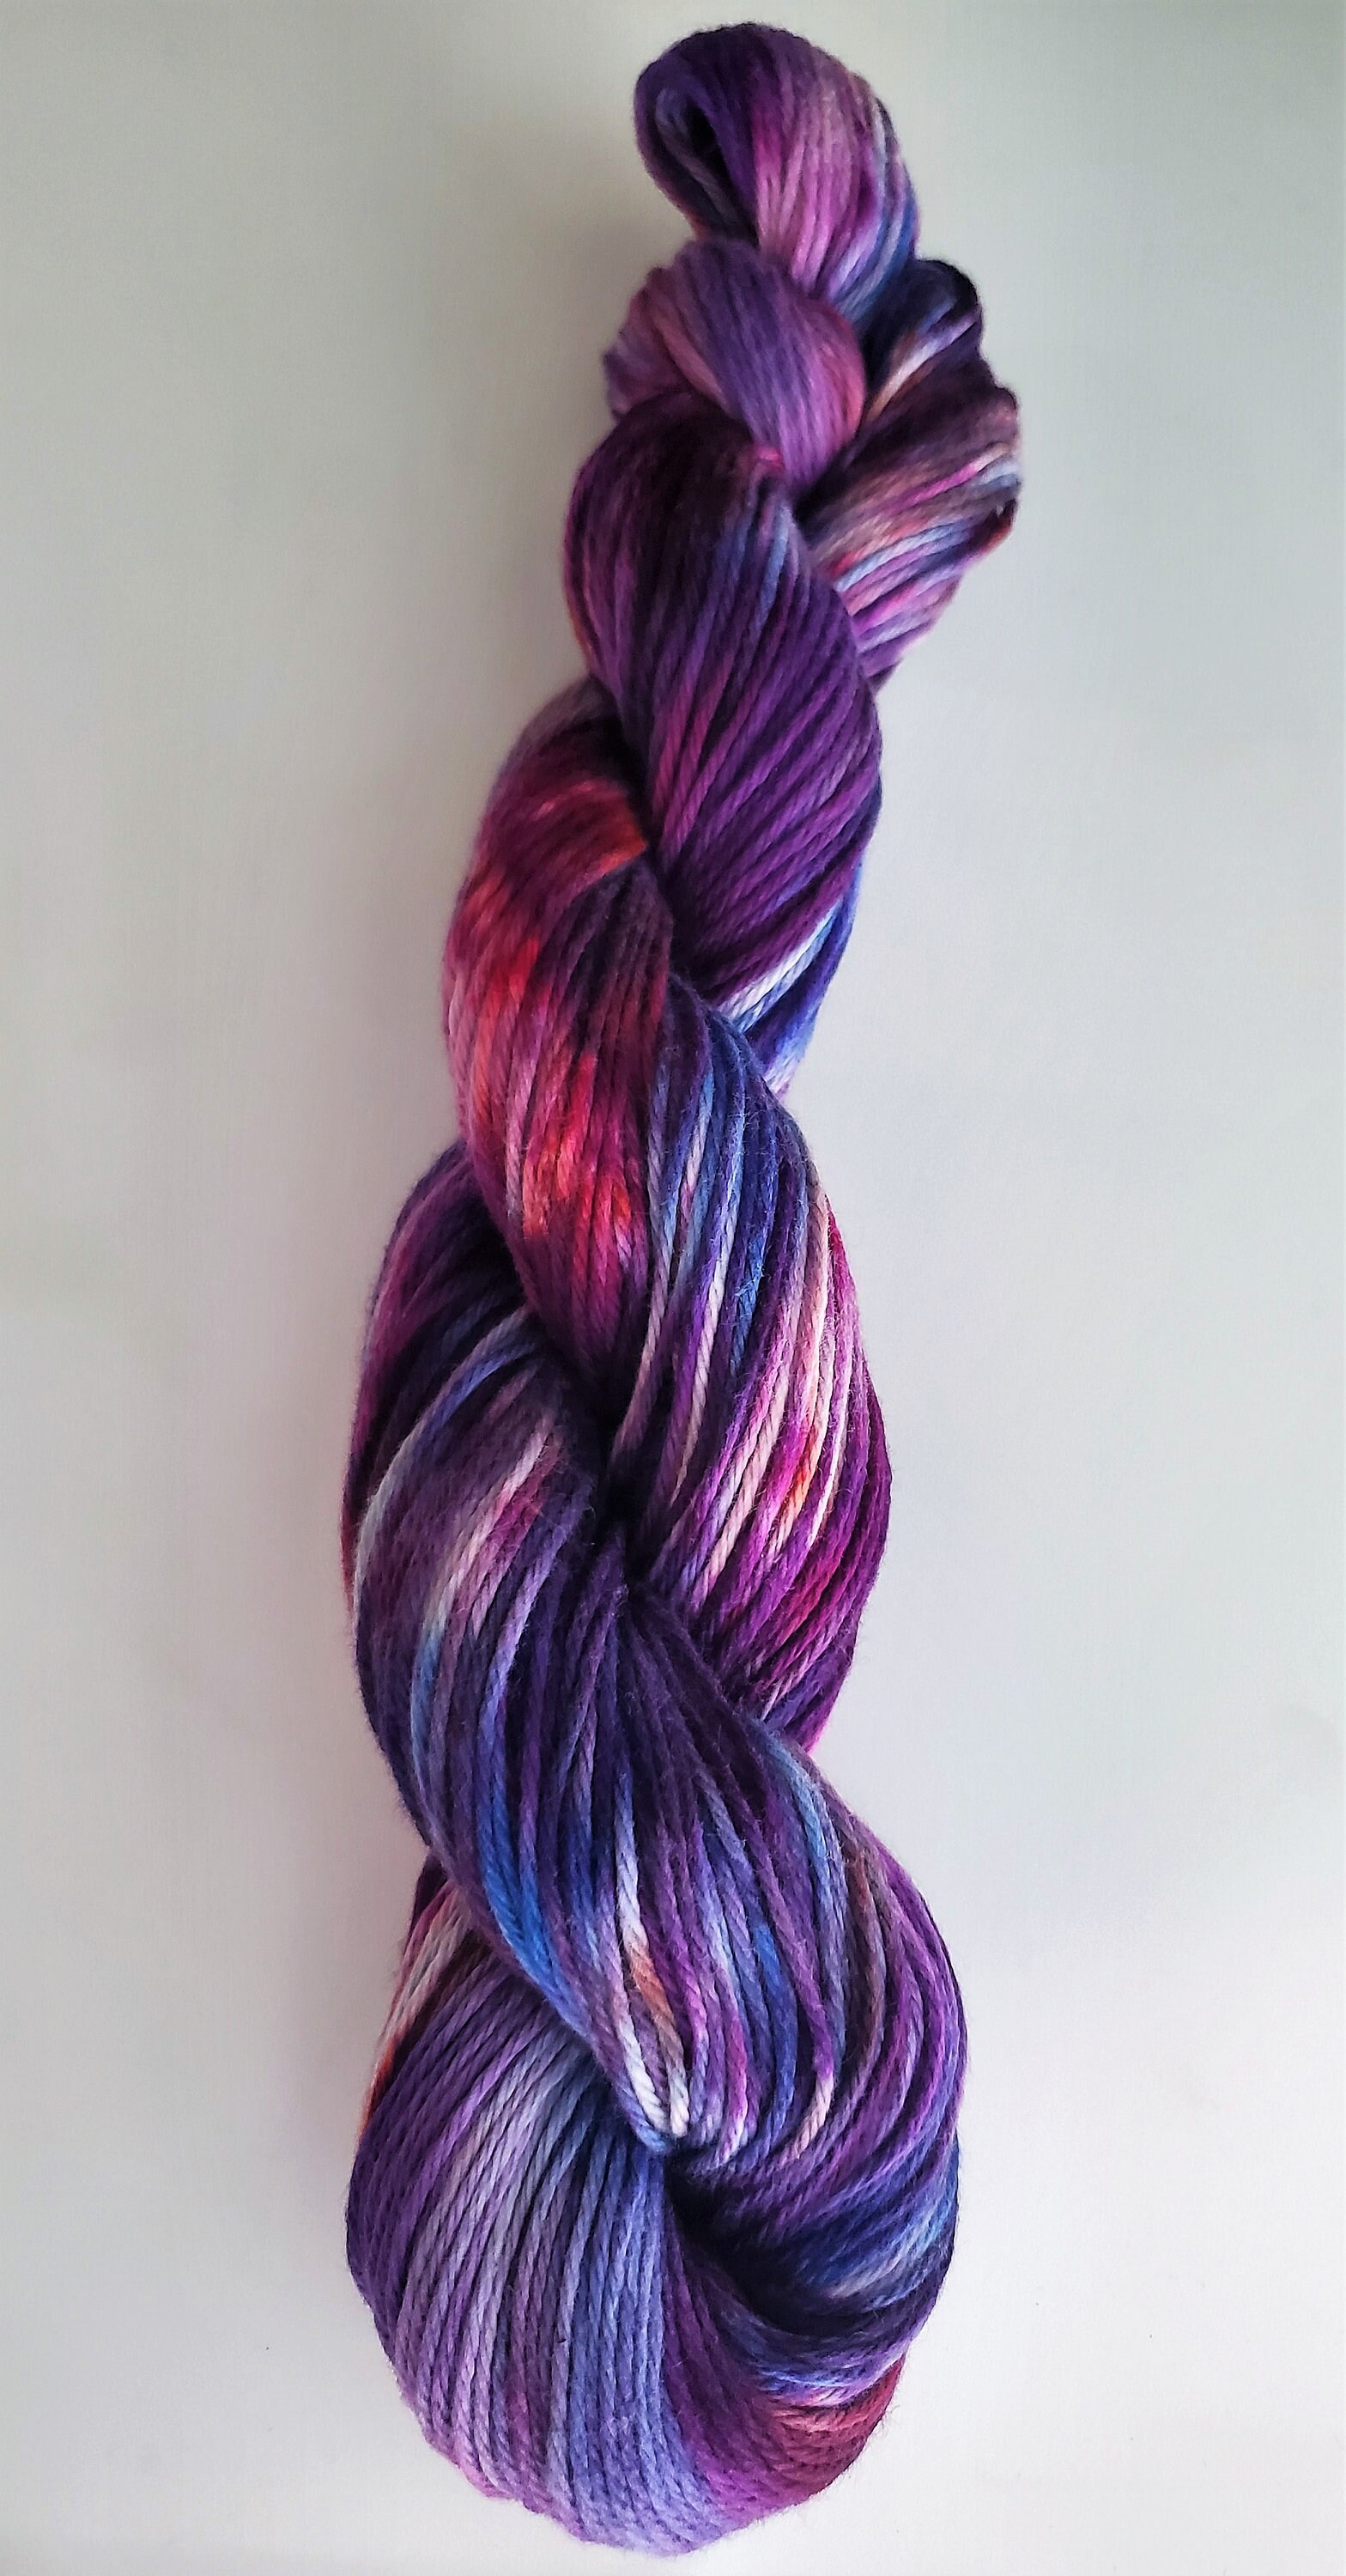 Purple Ombre Gradient Hand Spun Hand dyed Aran Weight Yarn for Crochet,  Knitting, and Worsted Weight Projects